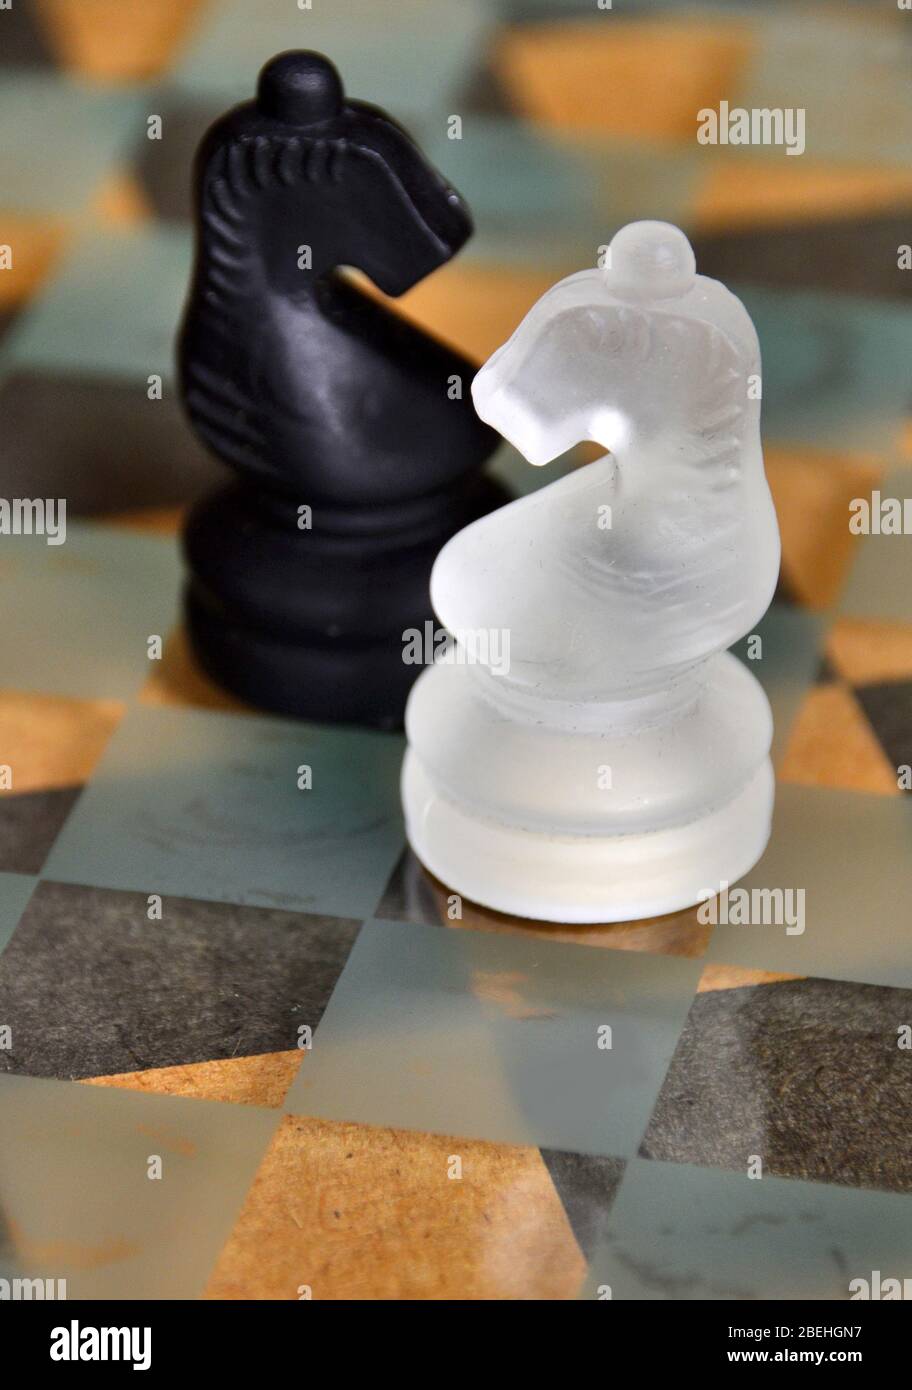 Black and white glass knight chess pieces on glass board. Stock Photo